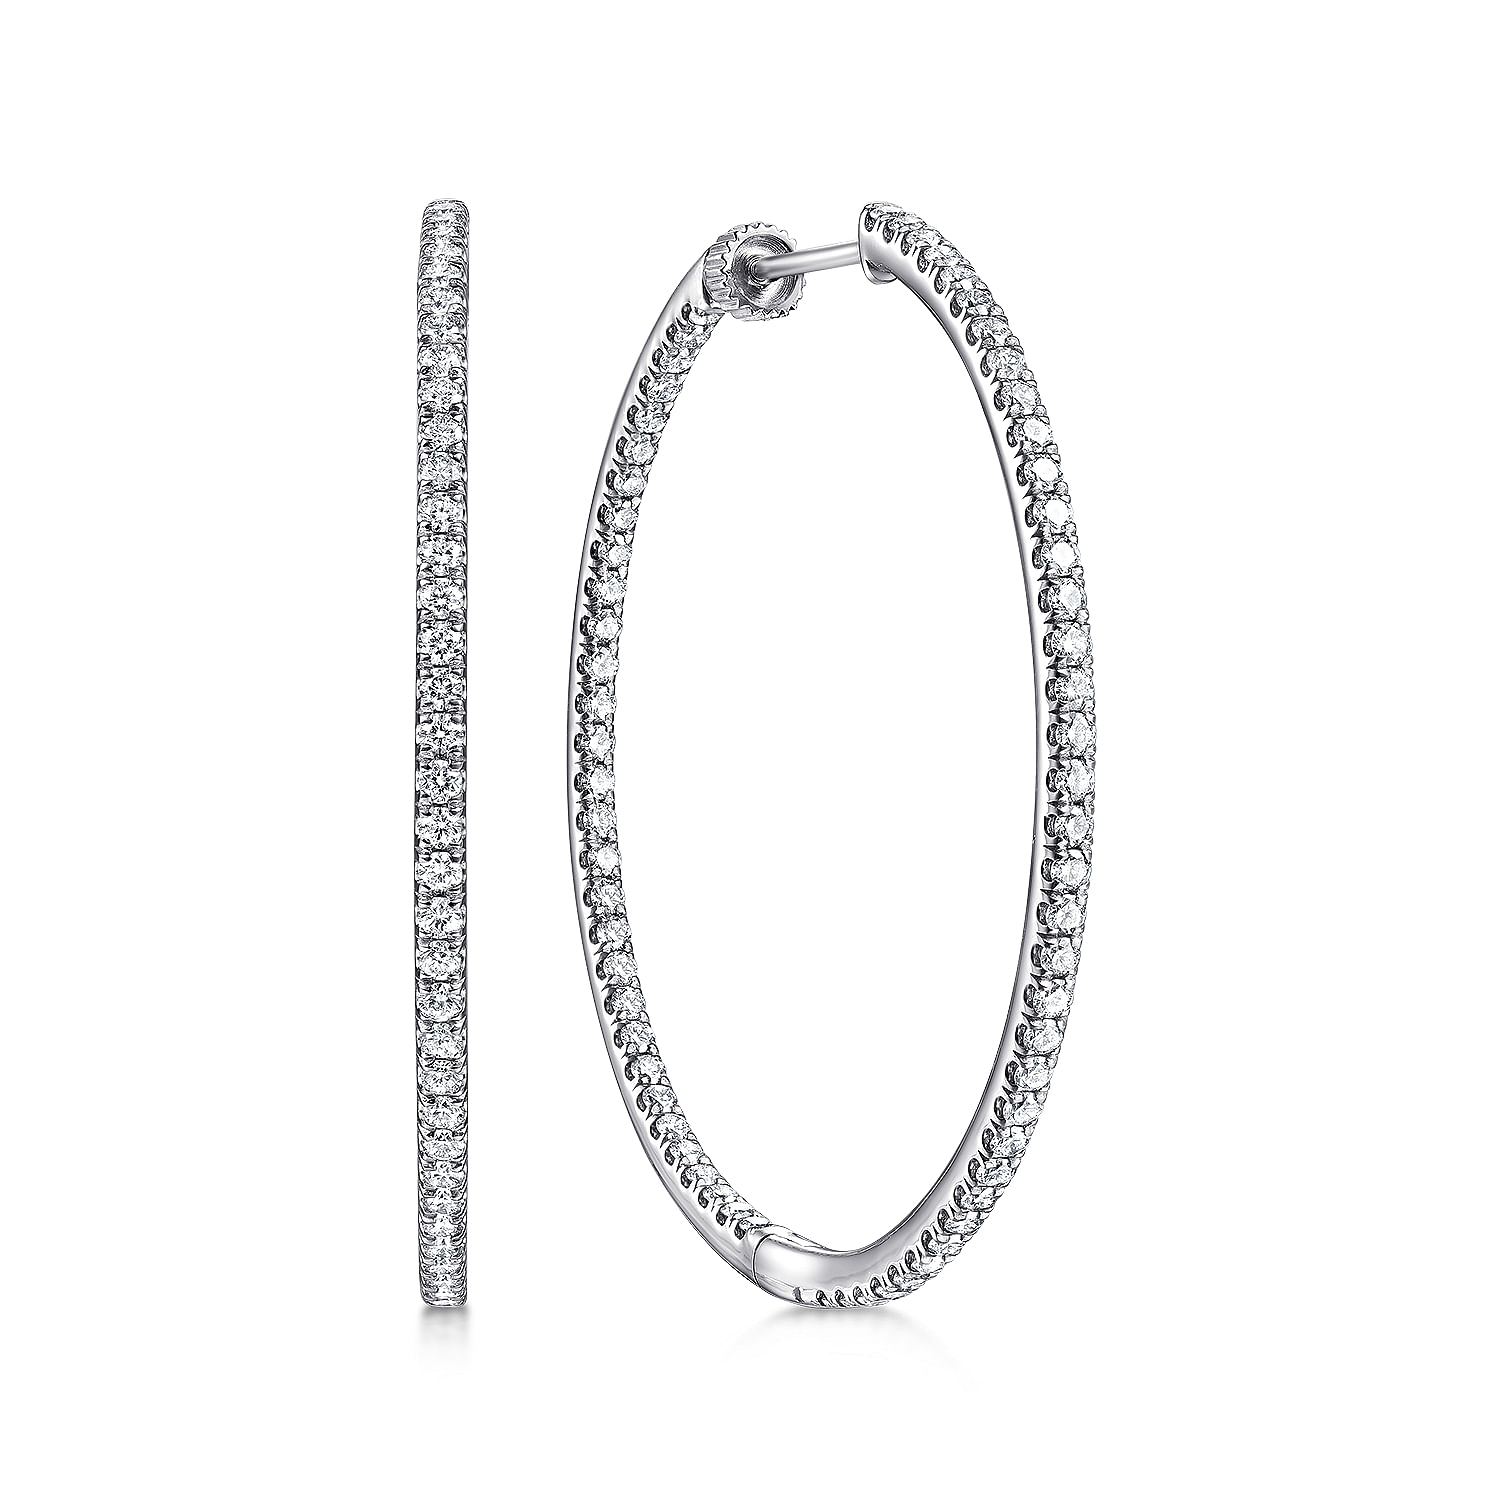 14K White Gold French Pave 40mm Round Inside Out Diamond Hoop Earrings